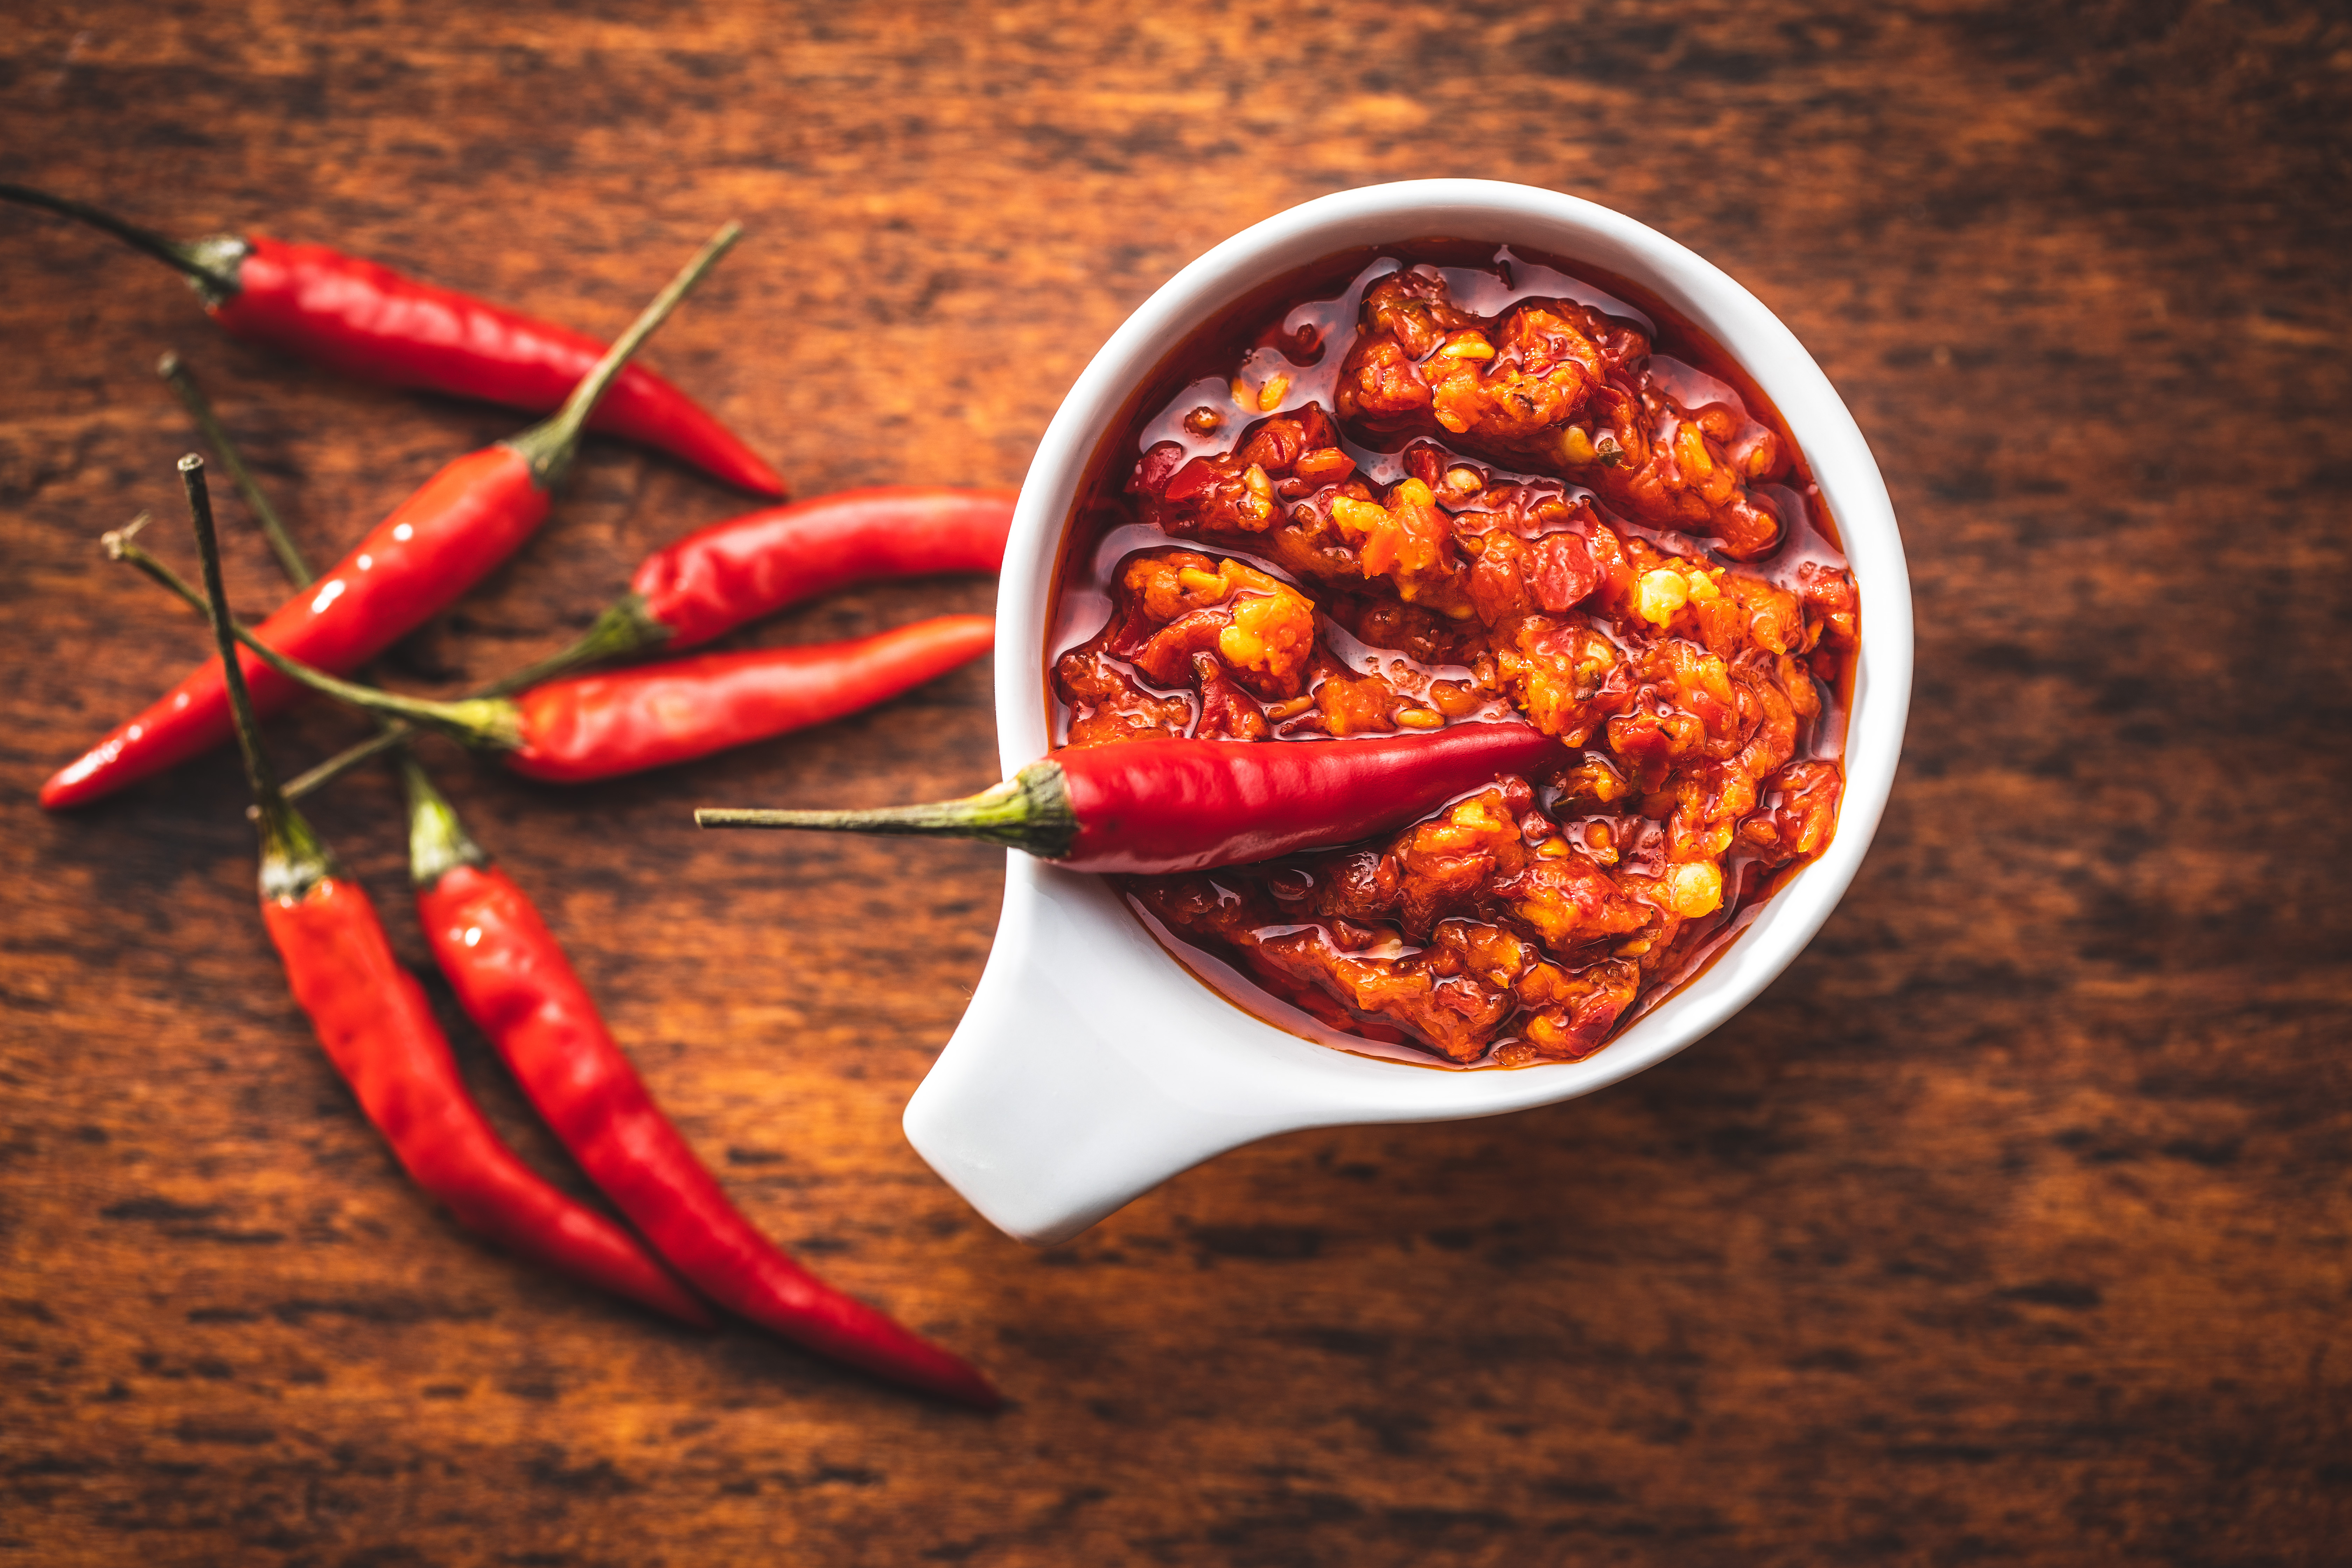 20230530 Lee Kum Kee  Article 1  The Health Benefits of Chilli Sauce Spicing Up Your Diet for Better